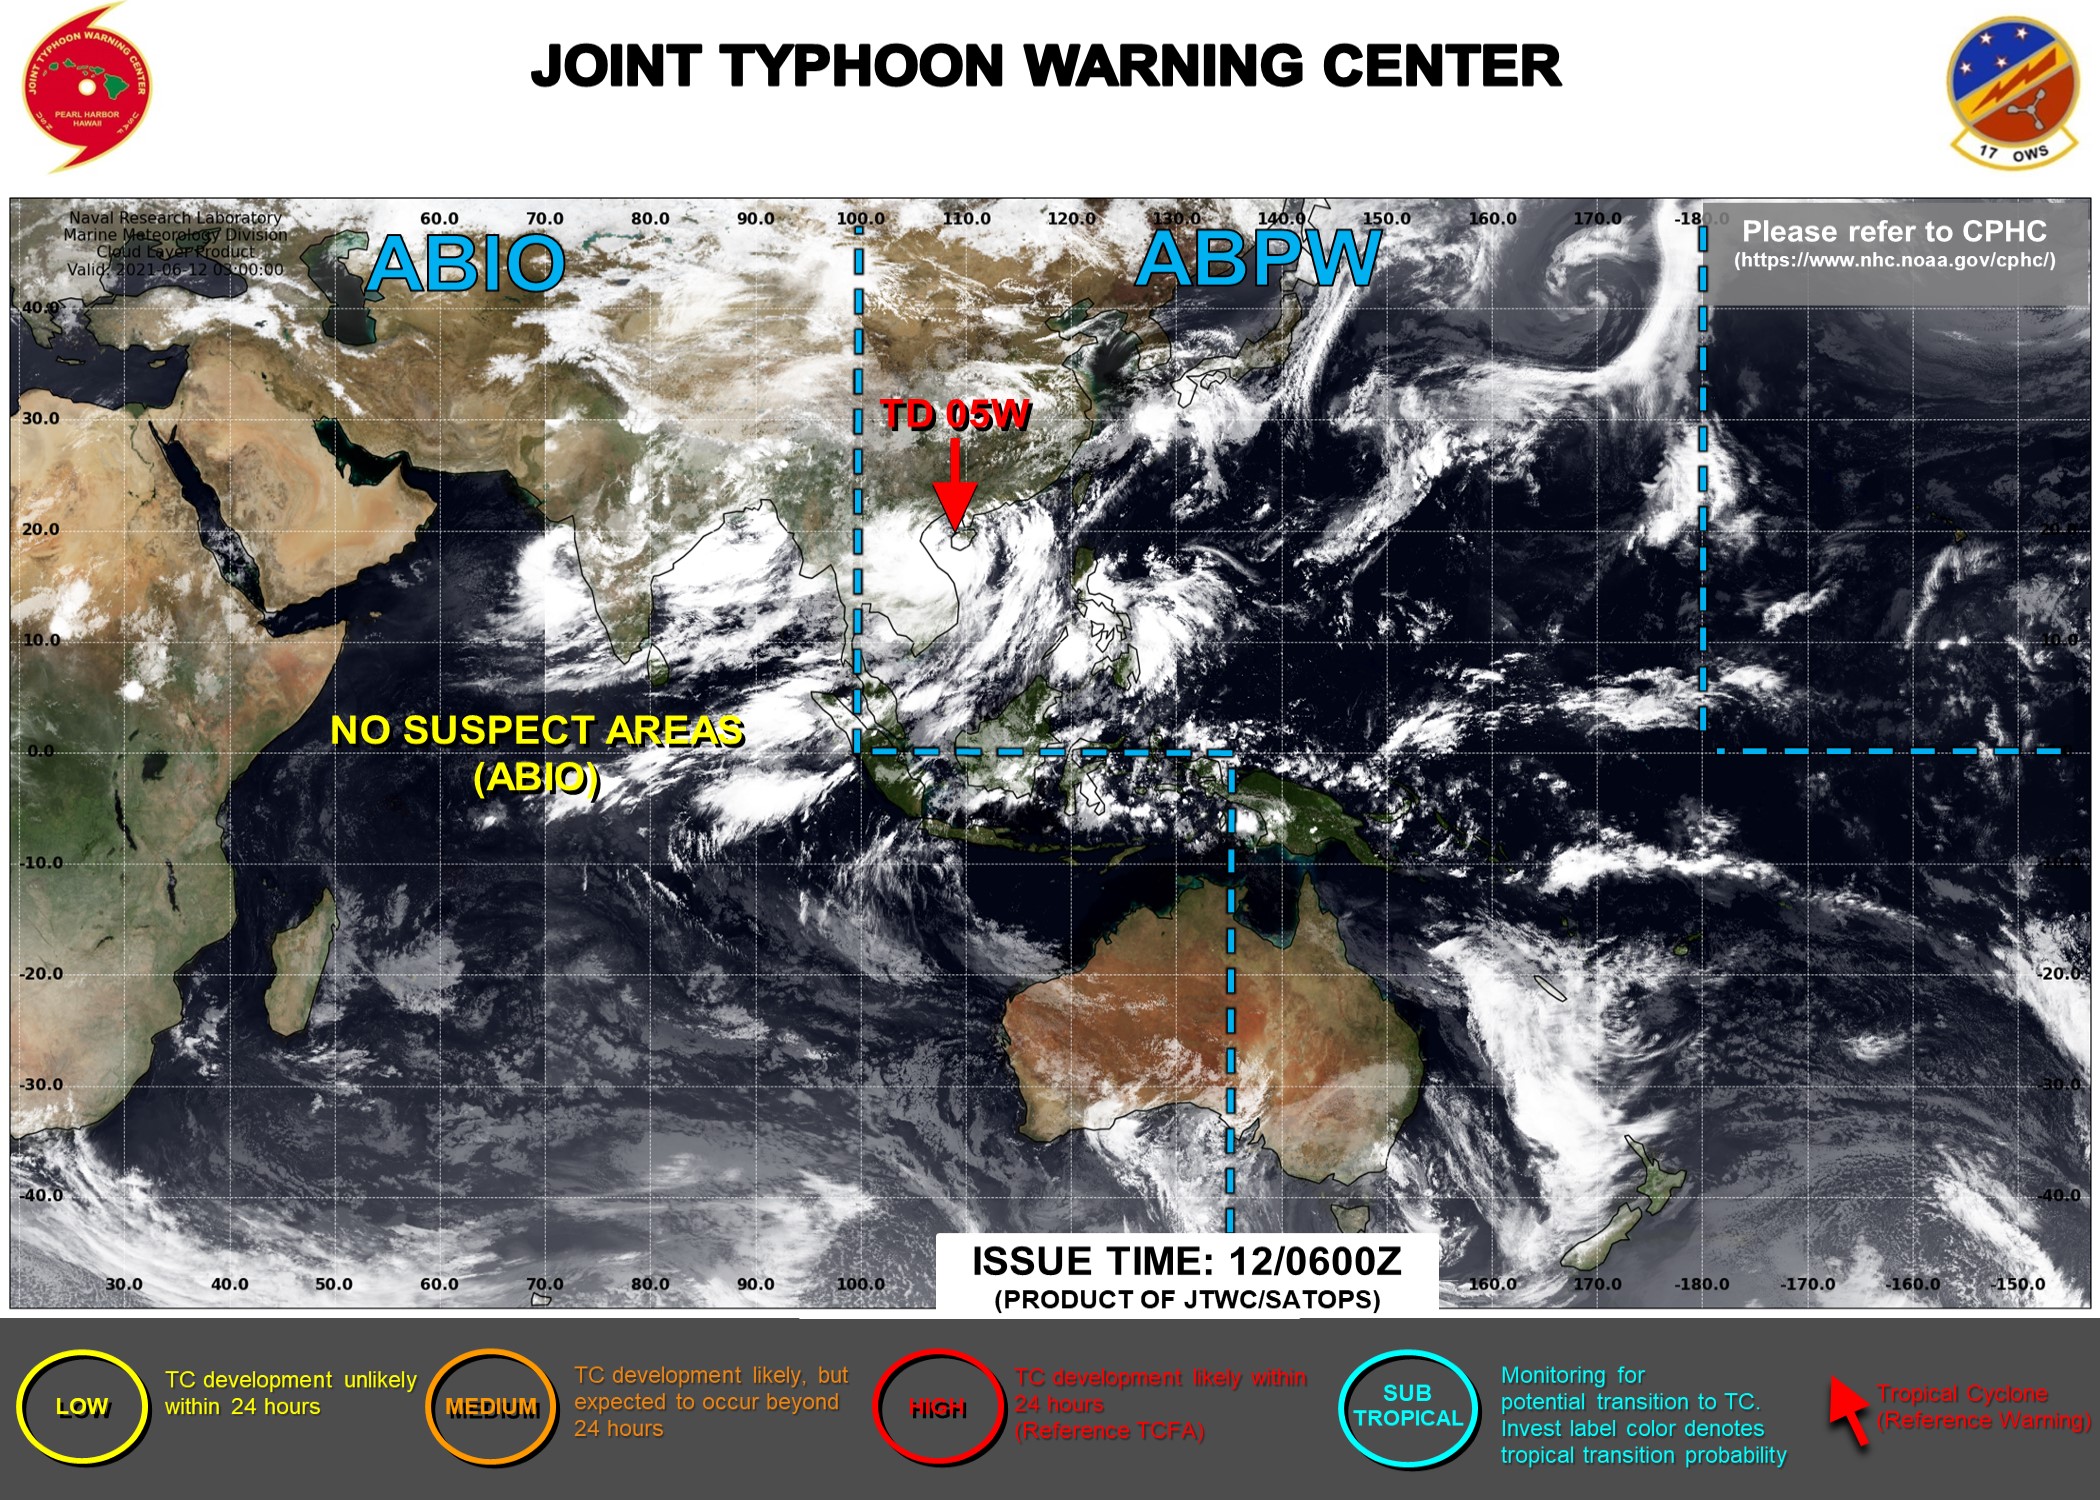 JTWC IS ISSUING 6HOURLY WARNINGS AND 3HOURLY SATELLITE BULLETINS ON TD 05W.